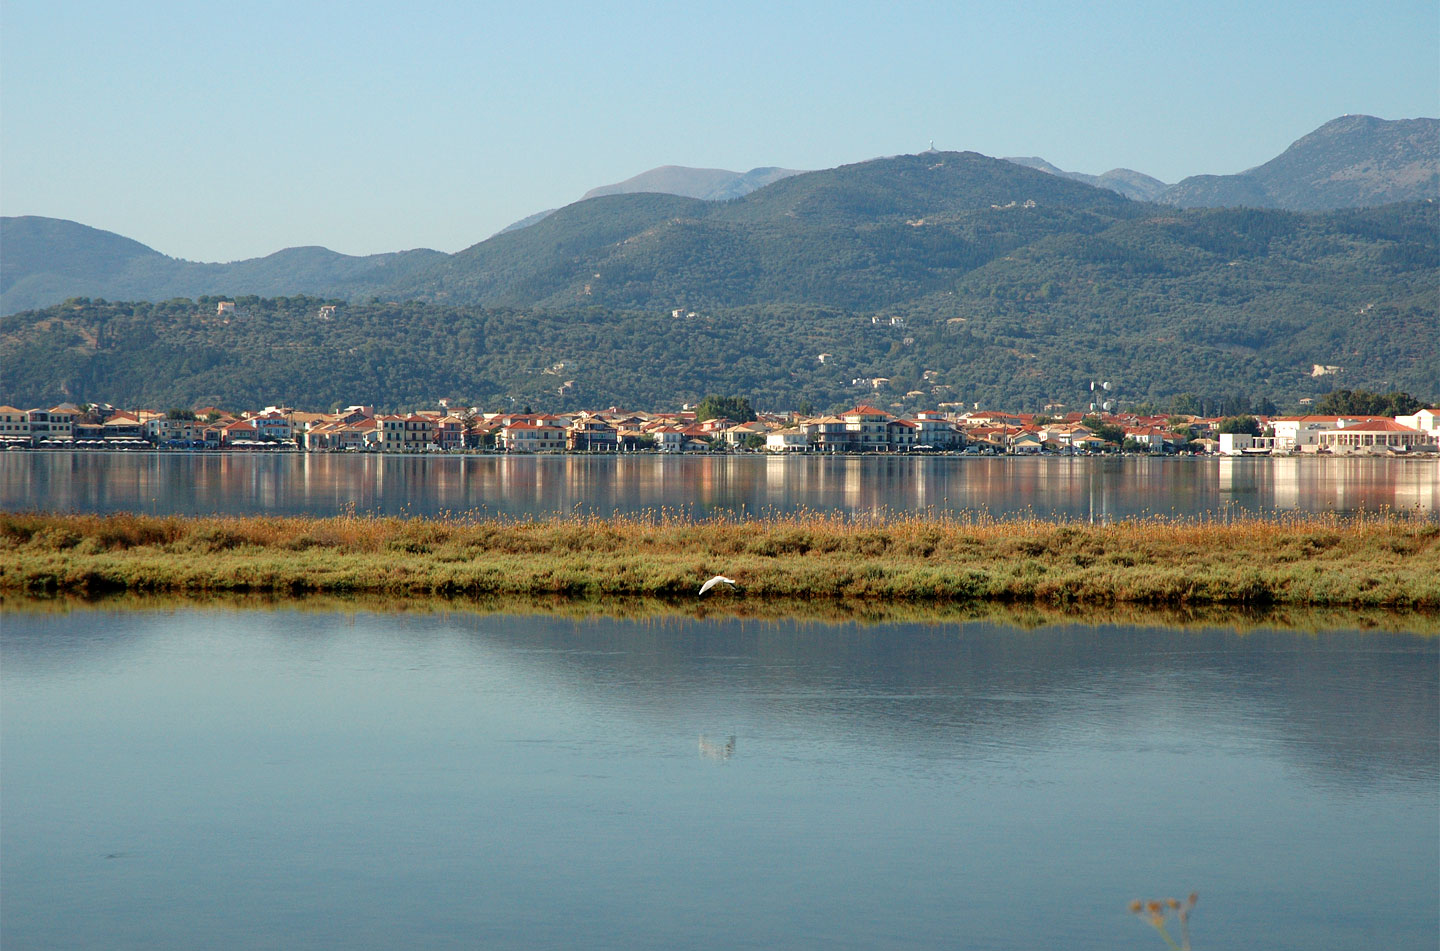 The town of Lefkada | View from Gyra